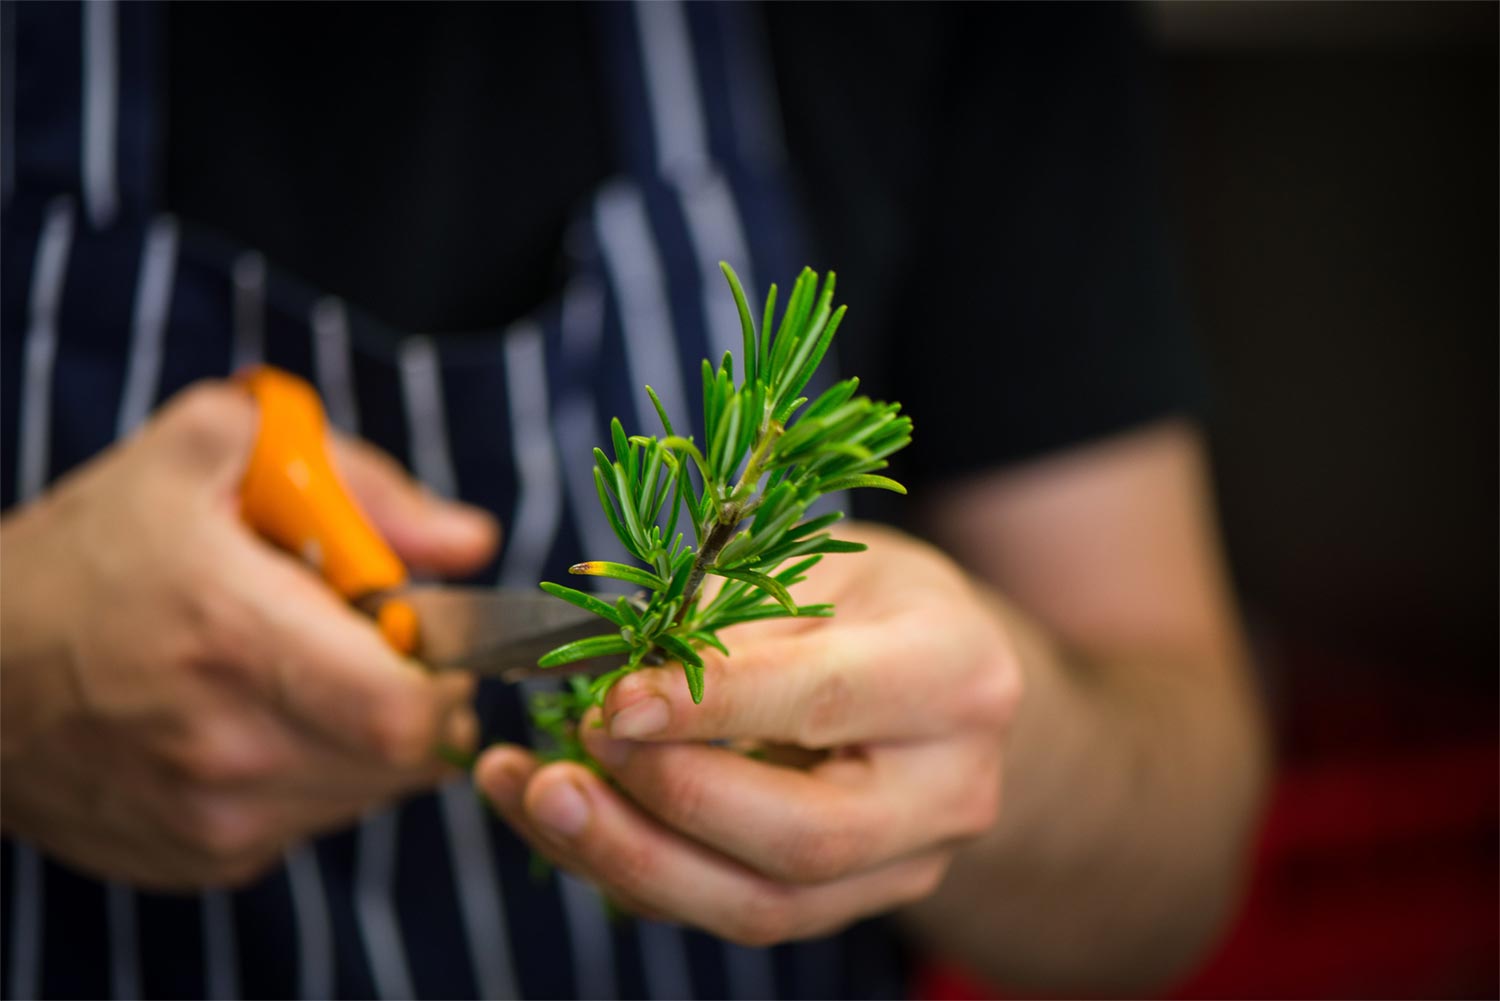 A vibrant sprig of rosemary being cut and prepared to garnish a disk at Cork’s infamous annual Long Table Dinner as part of Cork’s Midsummer Festival.